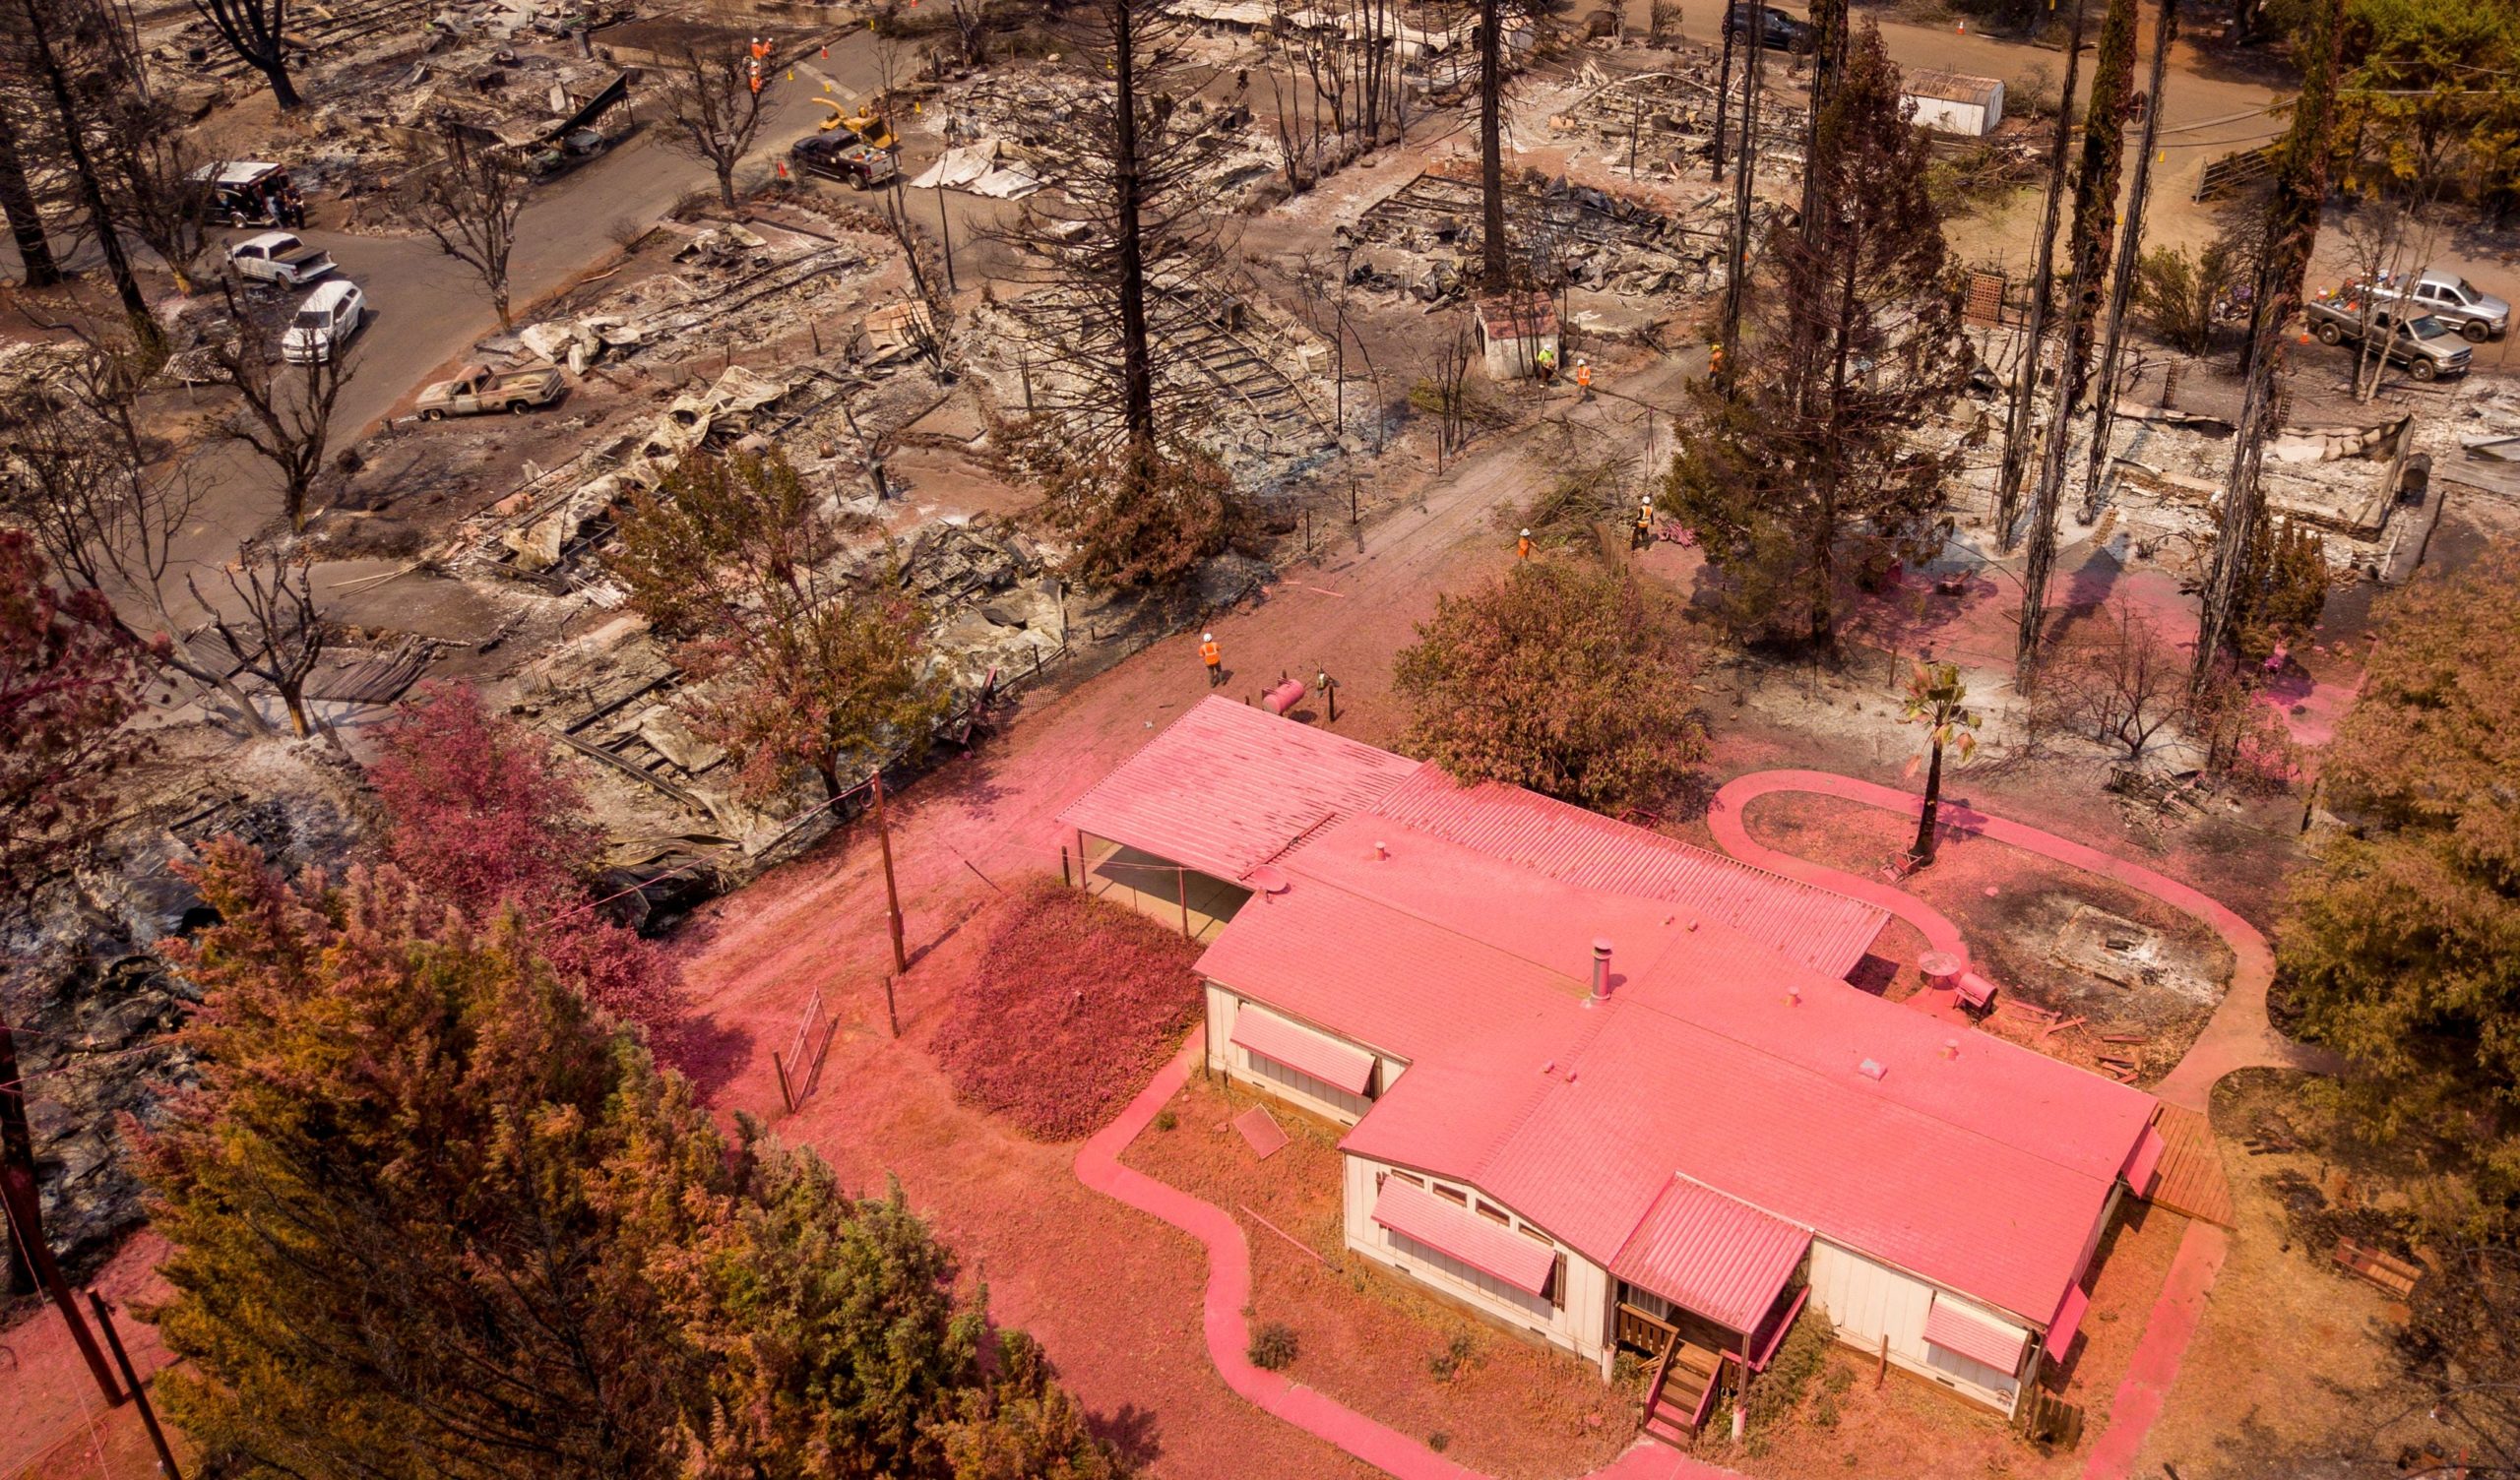 An aerial view shows a home covered in fire retardant near dozens of properties destroyed at the Creekside Mobile Home Park after the Cache fire ripped through the area in Clearlake, California, on Aug. 19, 2021 (Photo: Josh Edelson/AFP, Getty Images)